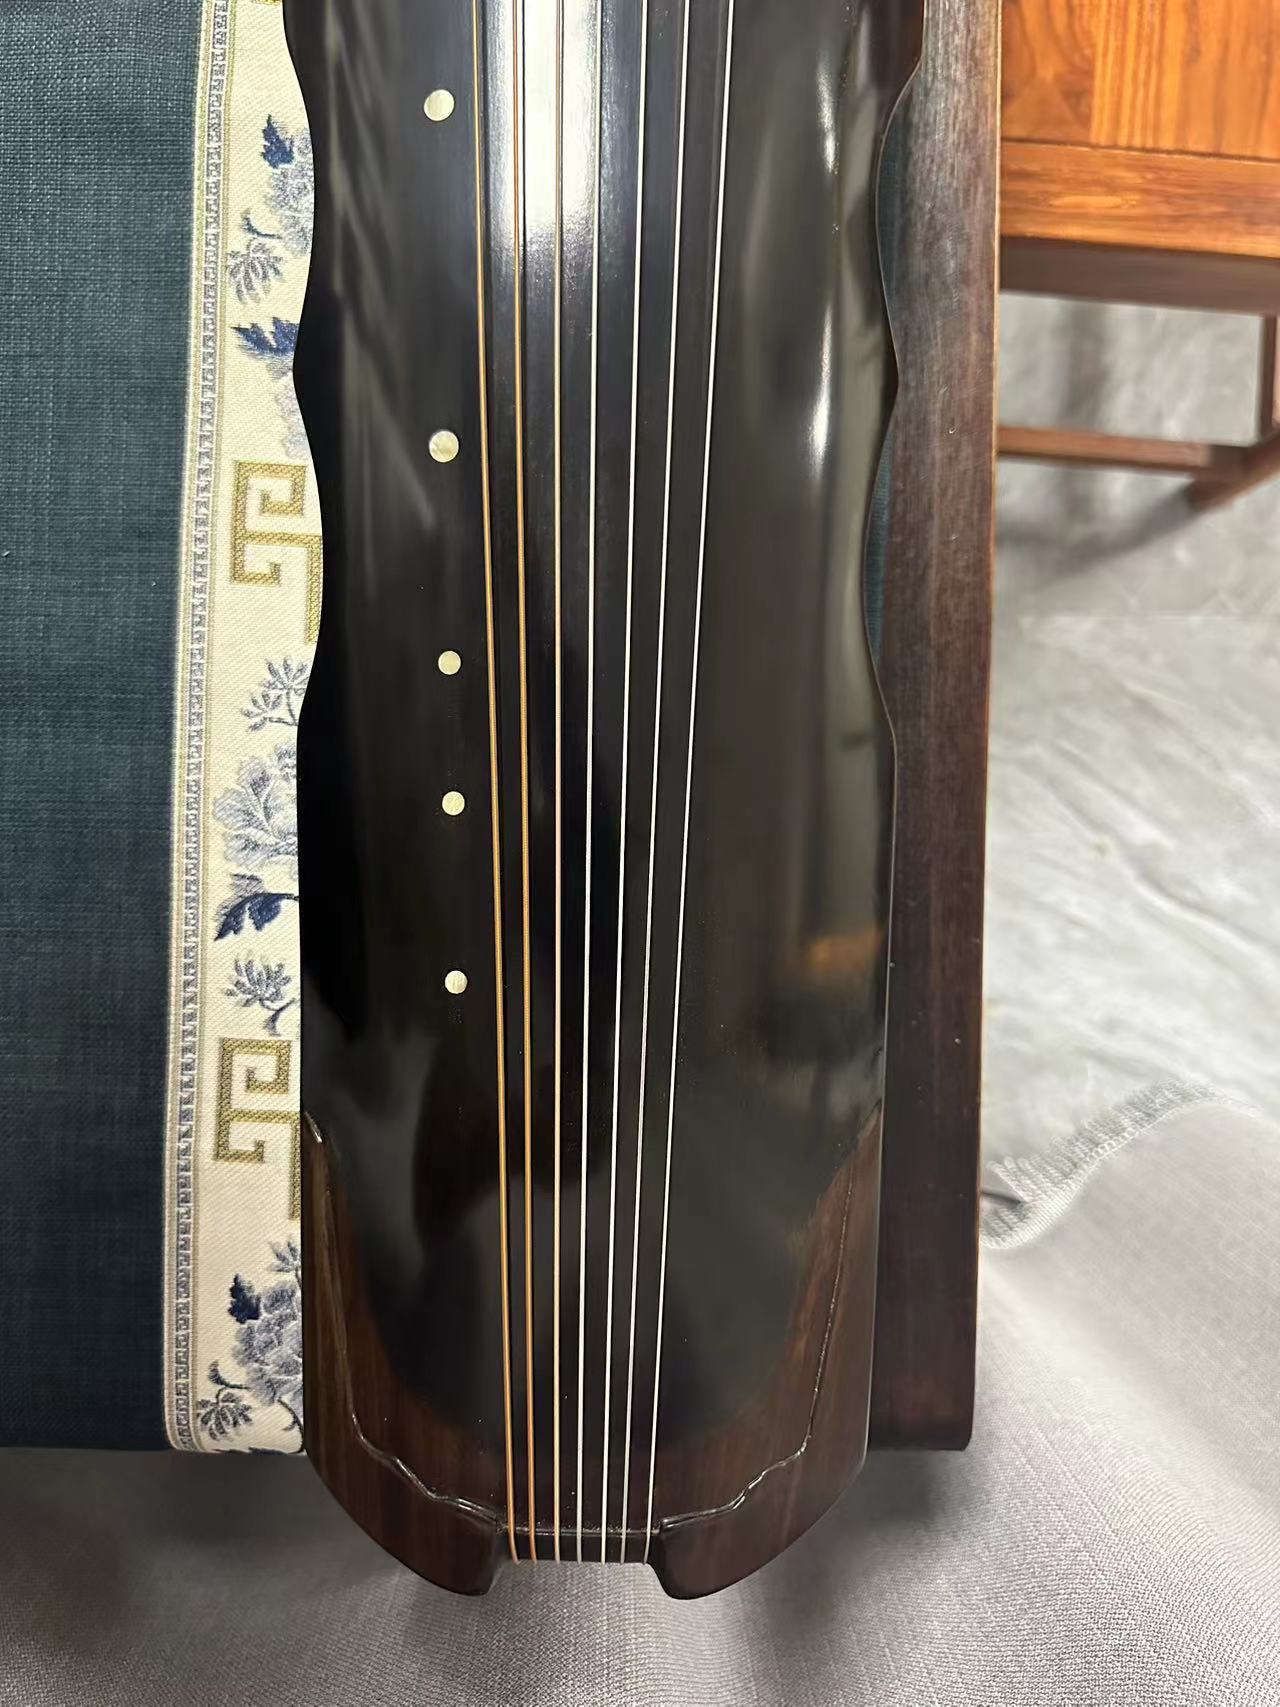 LANDTOM High-Level/Concert level pure handmade Zhongni style 100+ years aged wood Guqin/Chinese zither by famous master